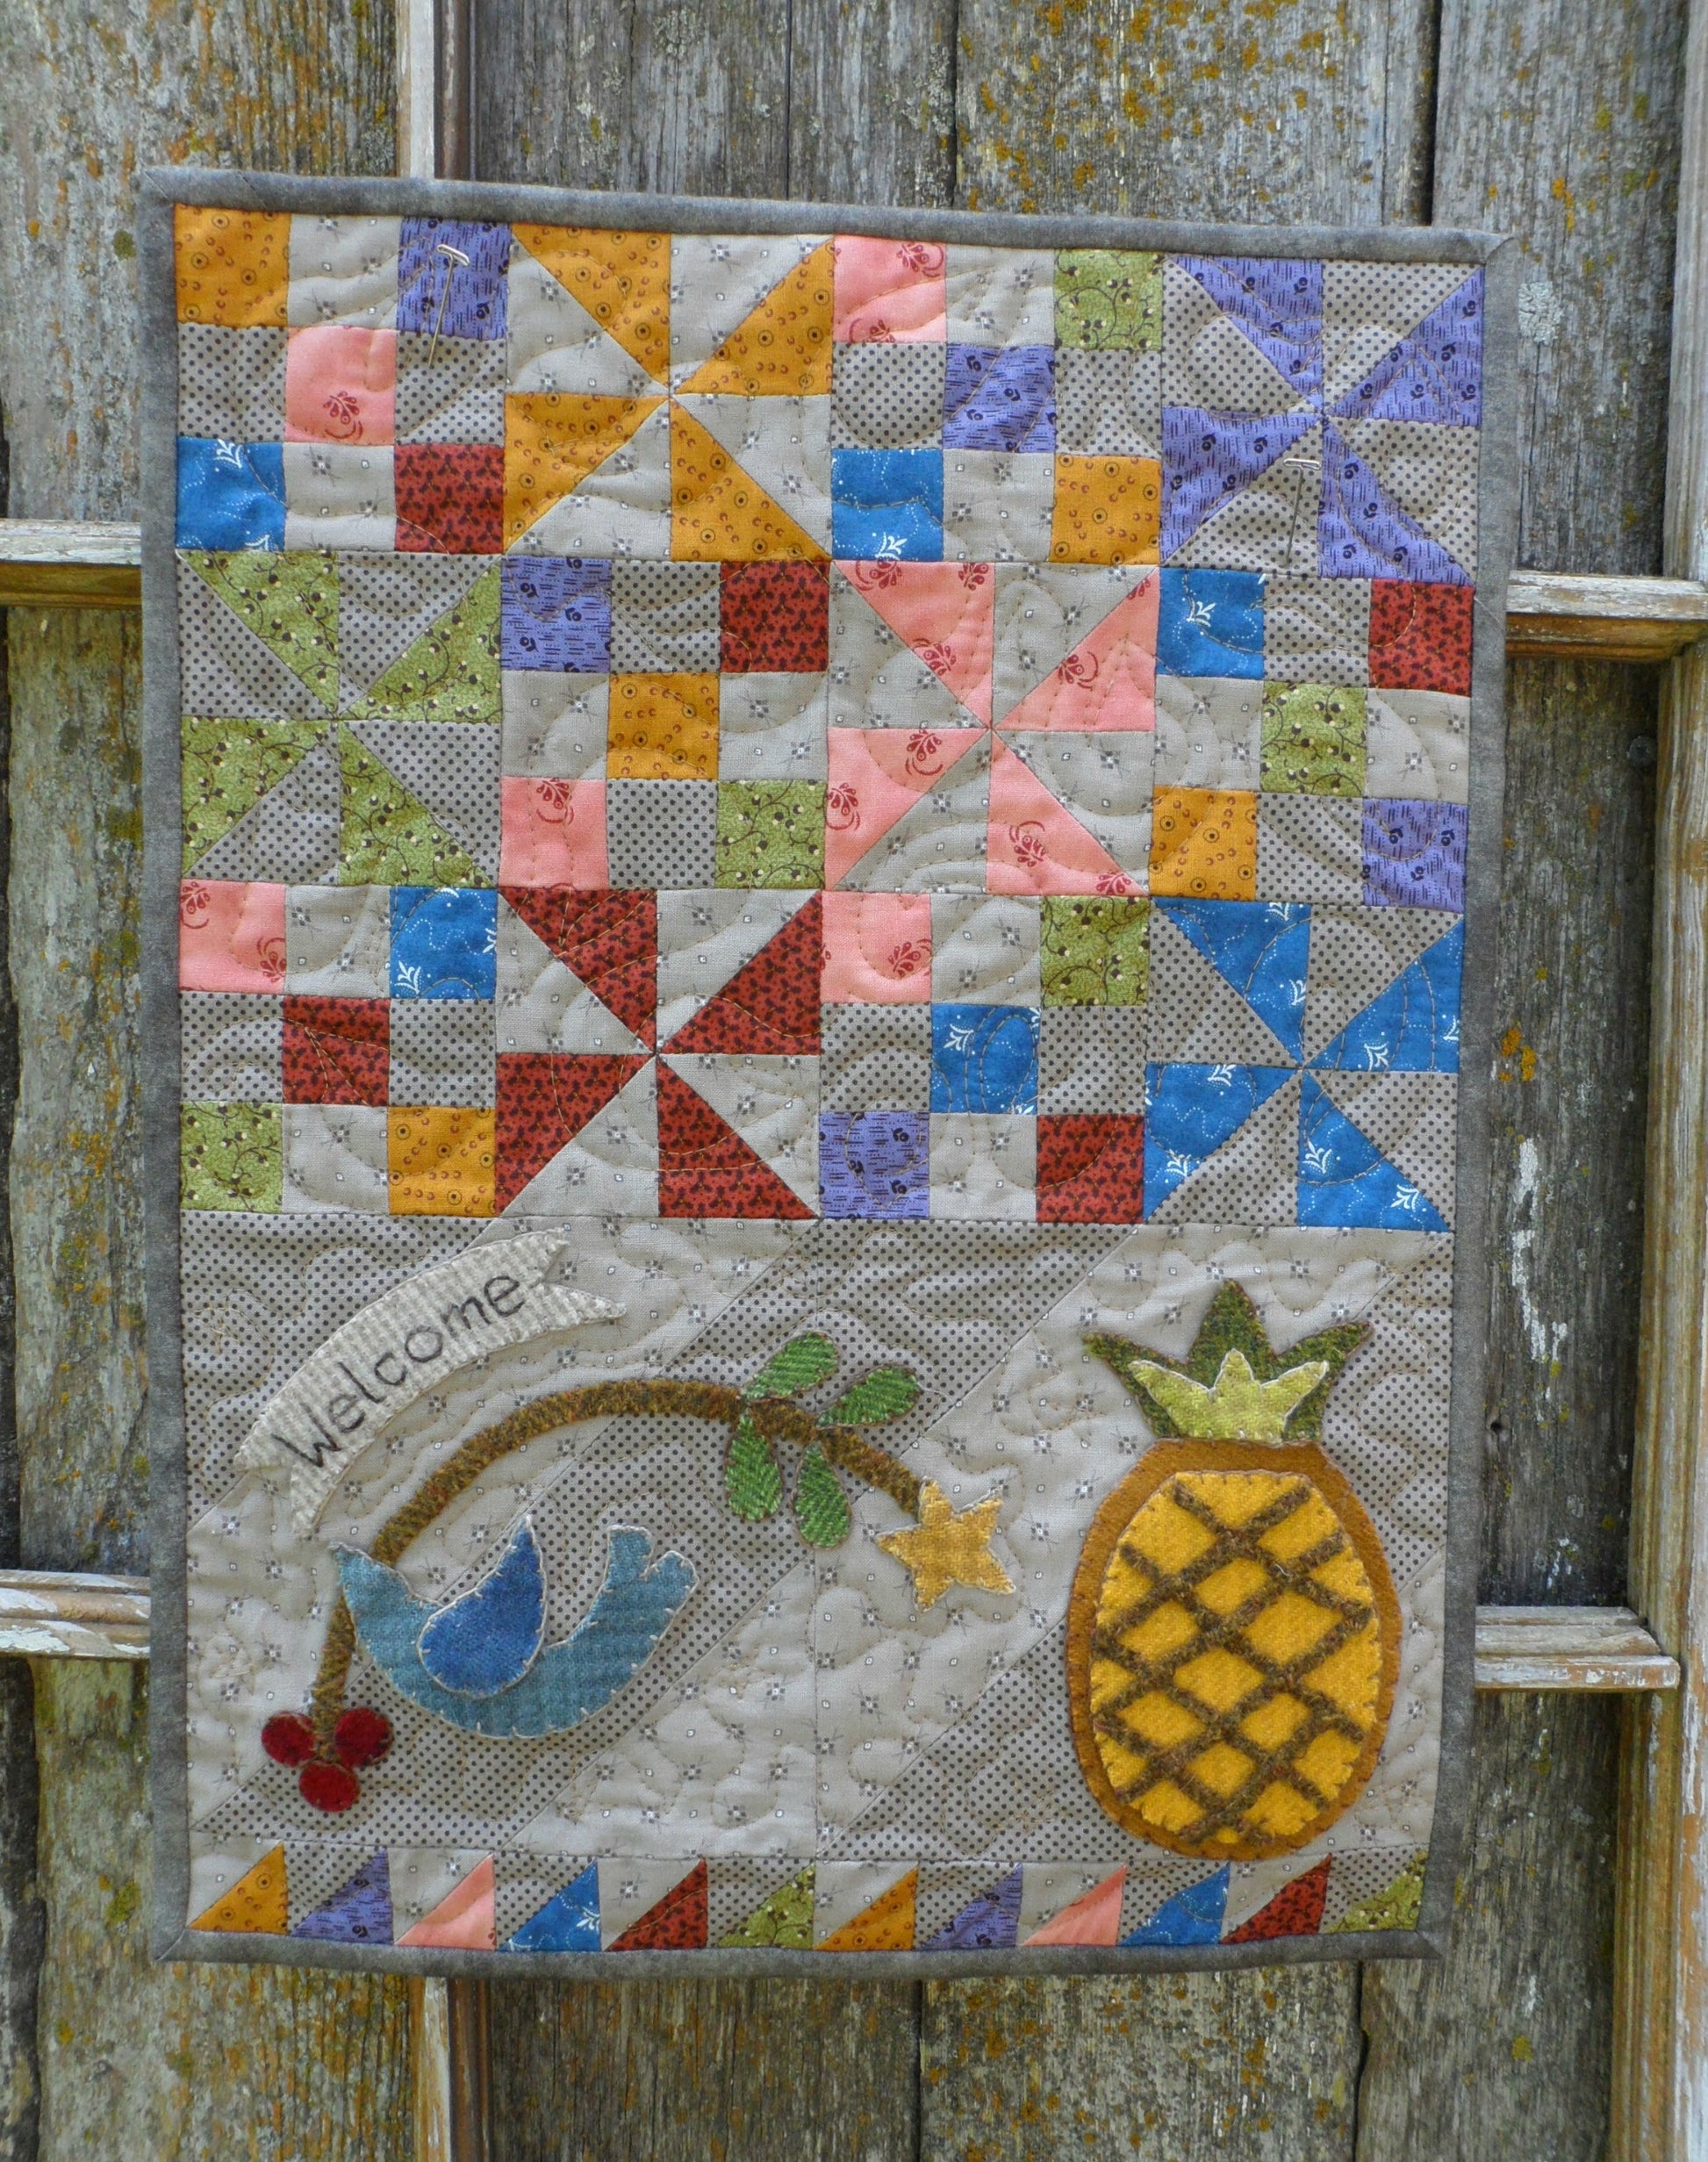 snugg-let wool applique on fabric mini kit